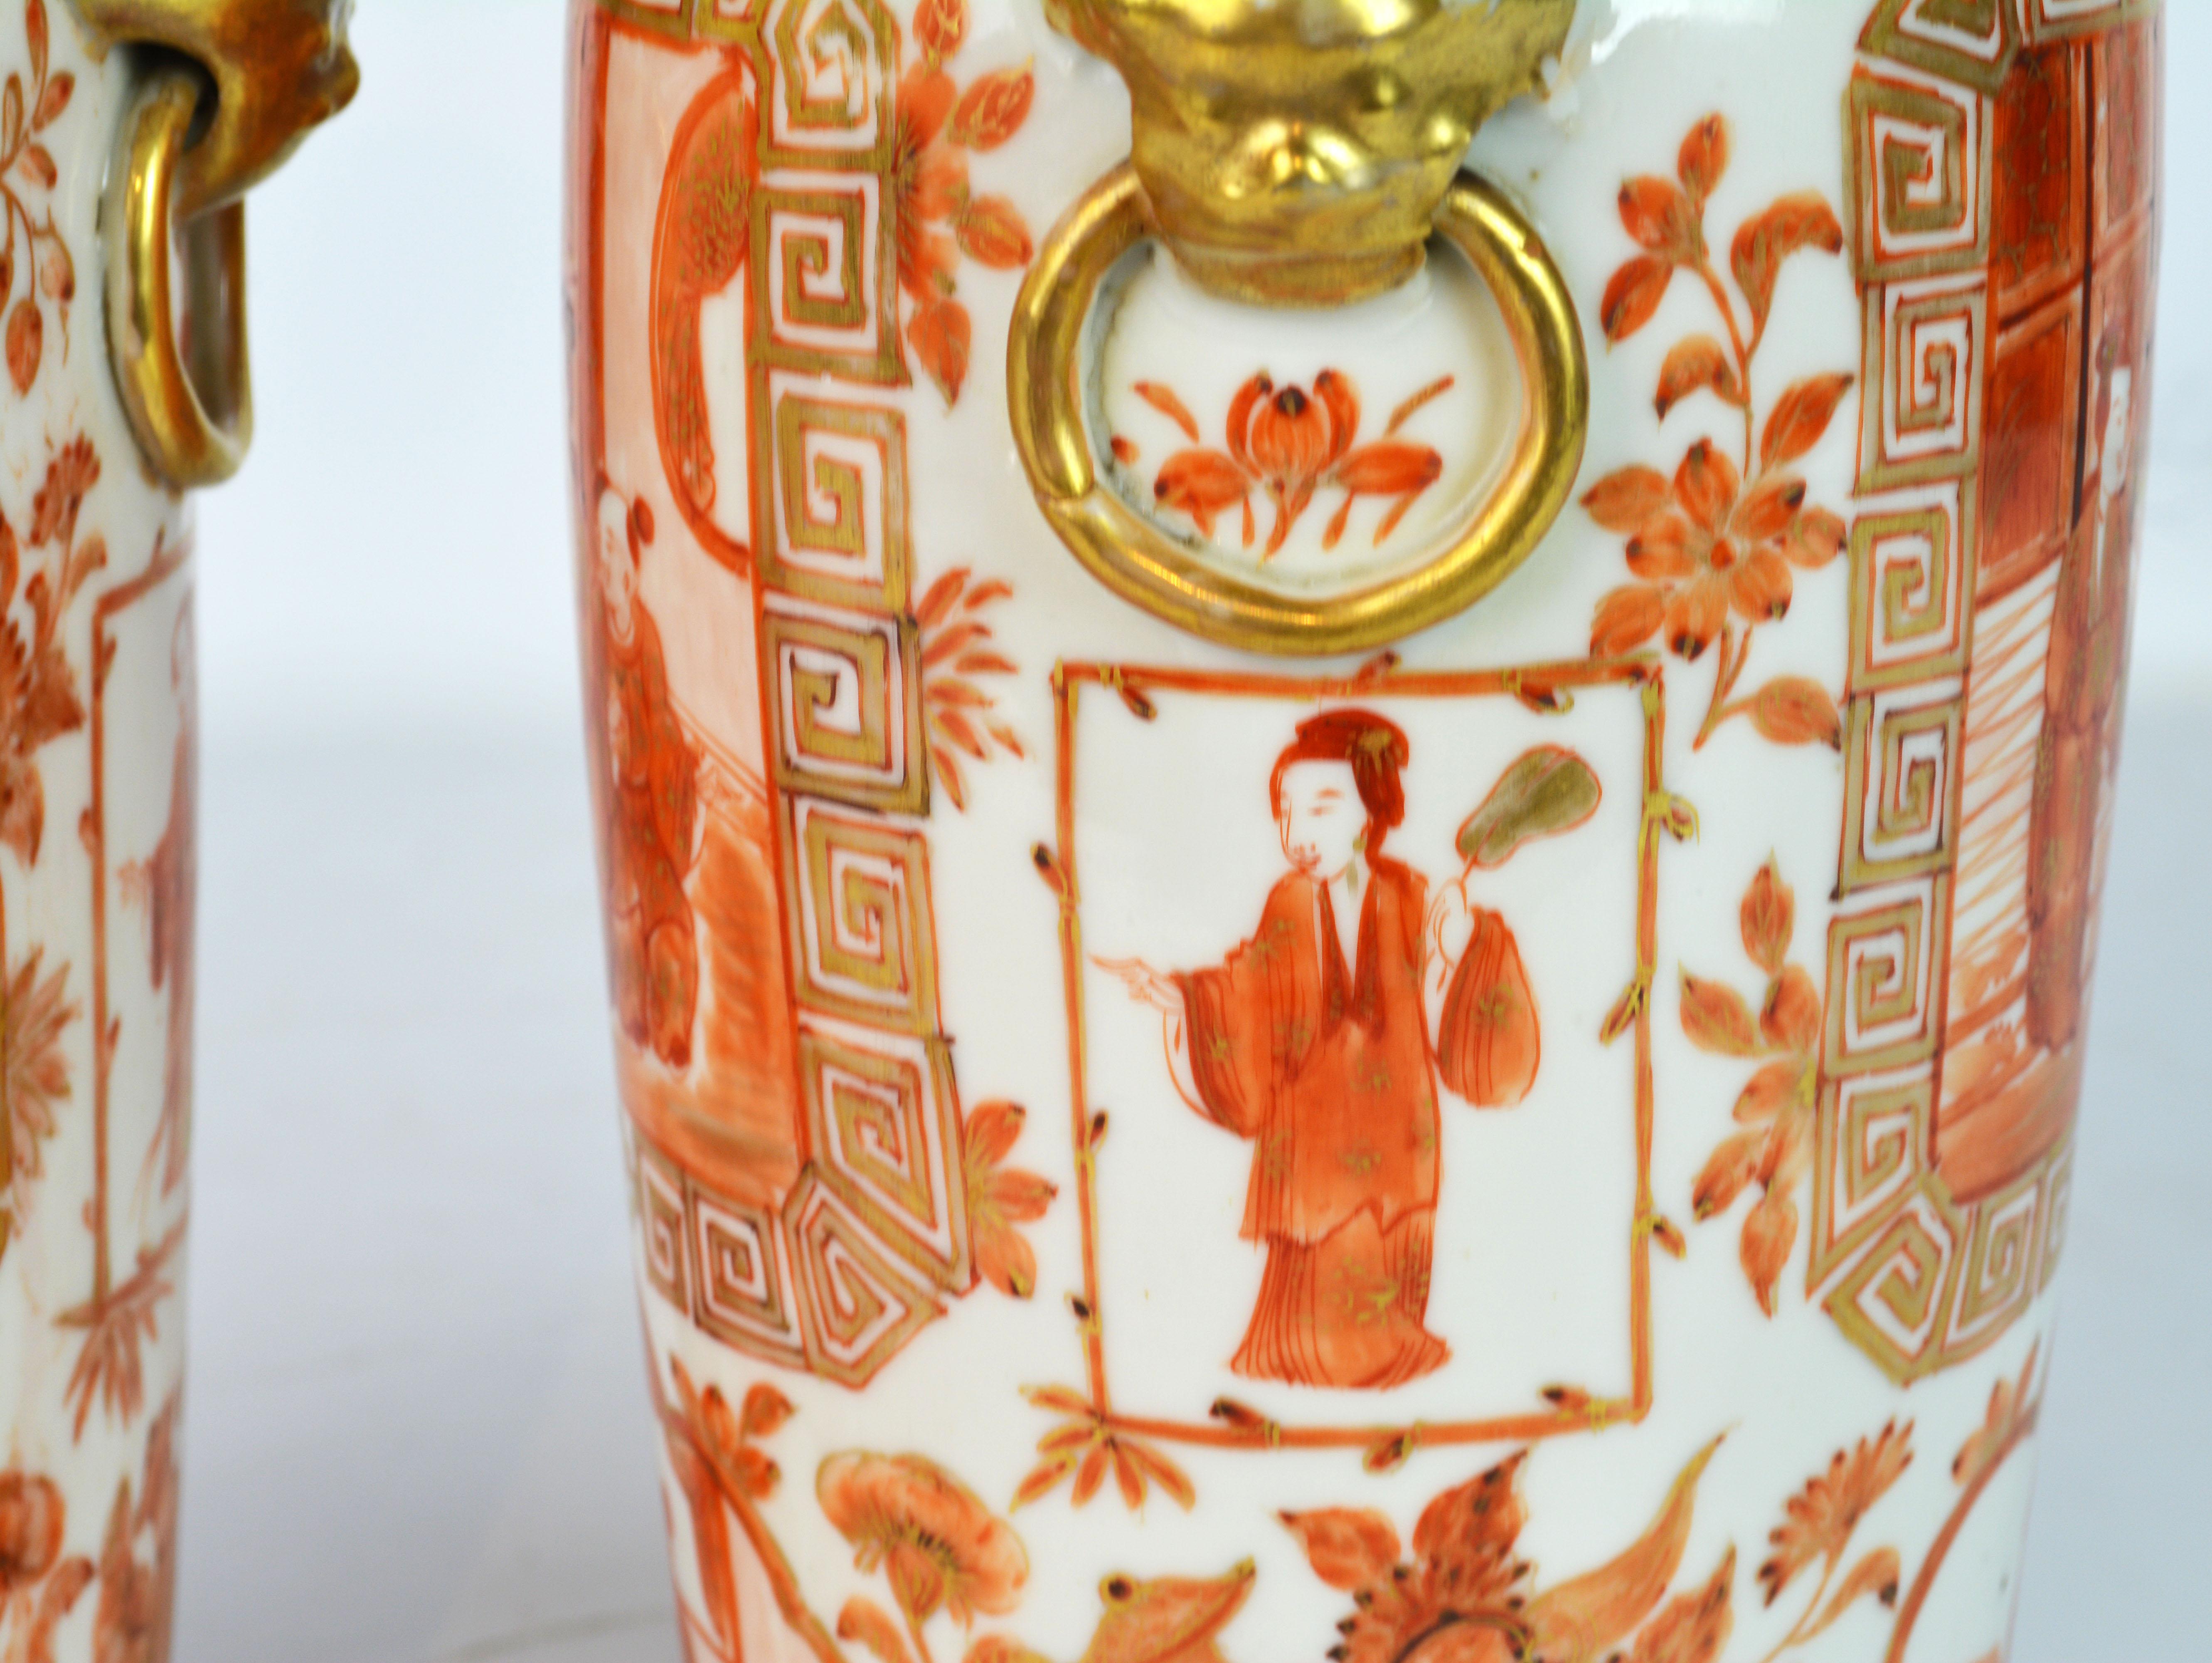 Rare 19th Century Orange and Gilt Decorated Chinese Export Daoguang Vases, Pair 5